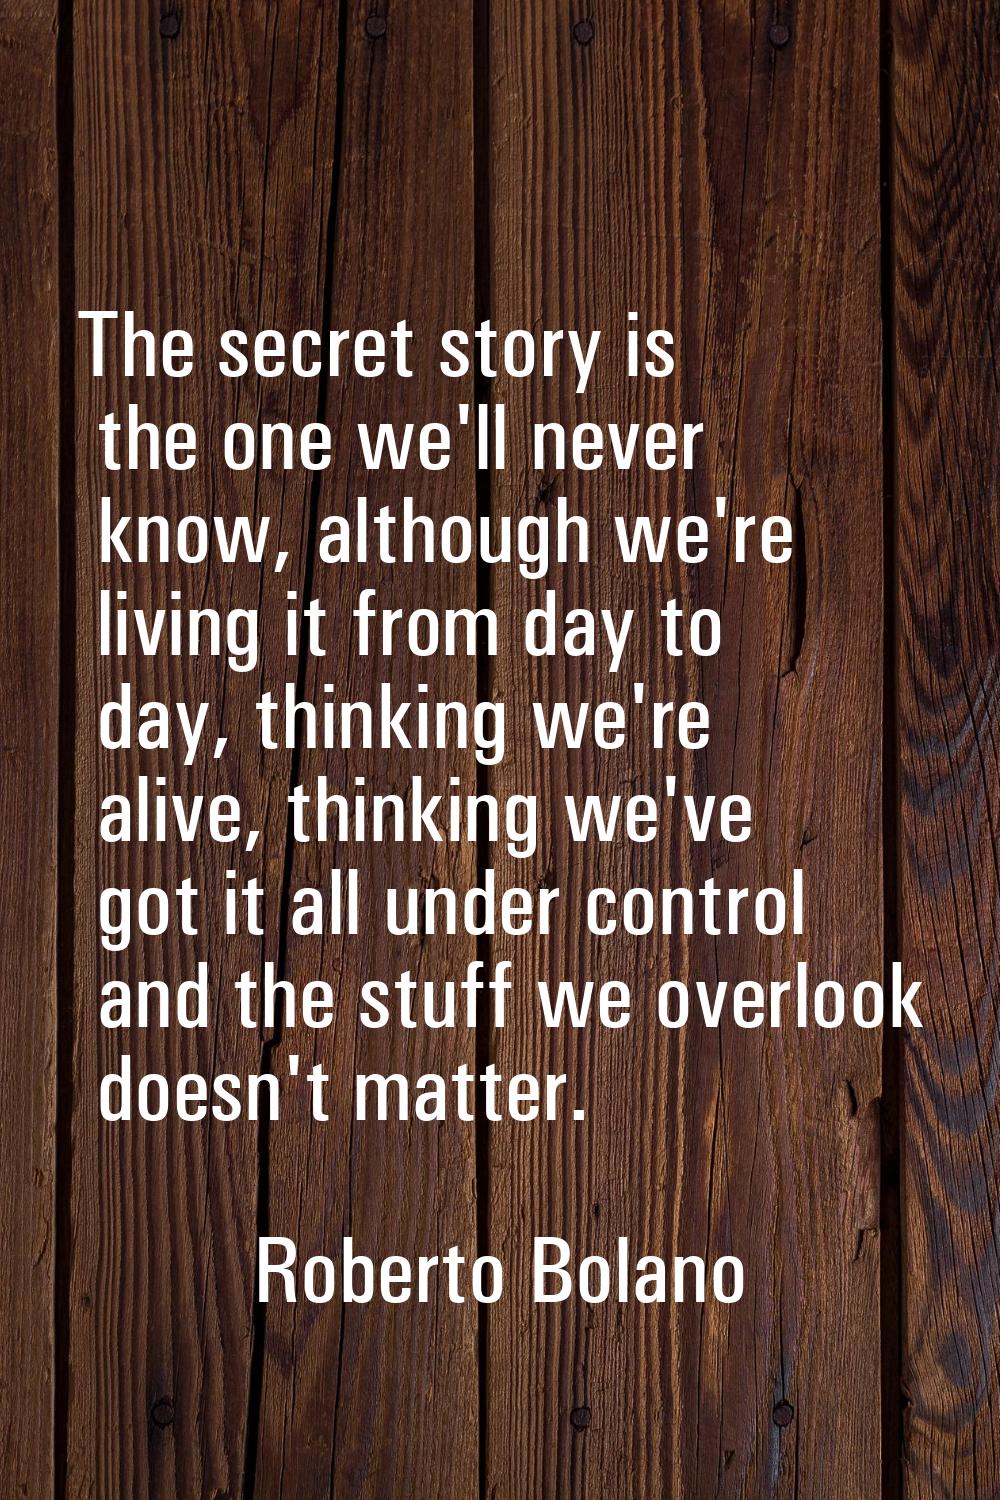 The secret story is the one we'll never know, although we're living it from day to day, thinking we